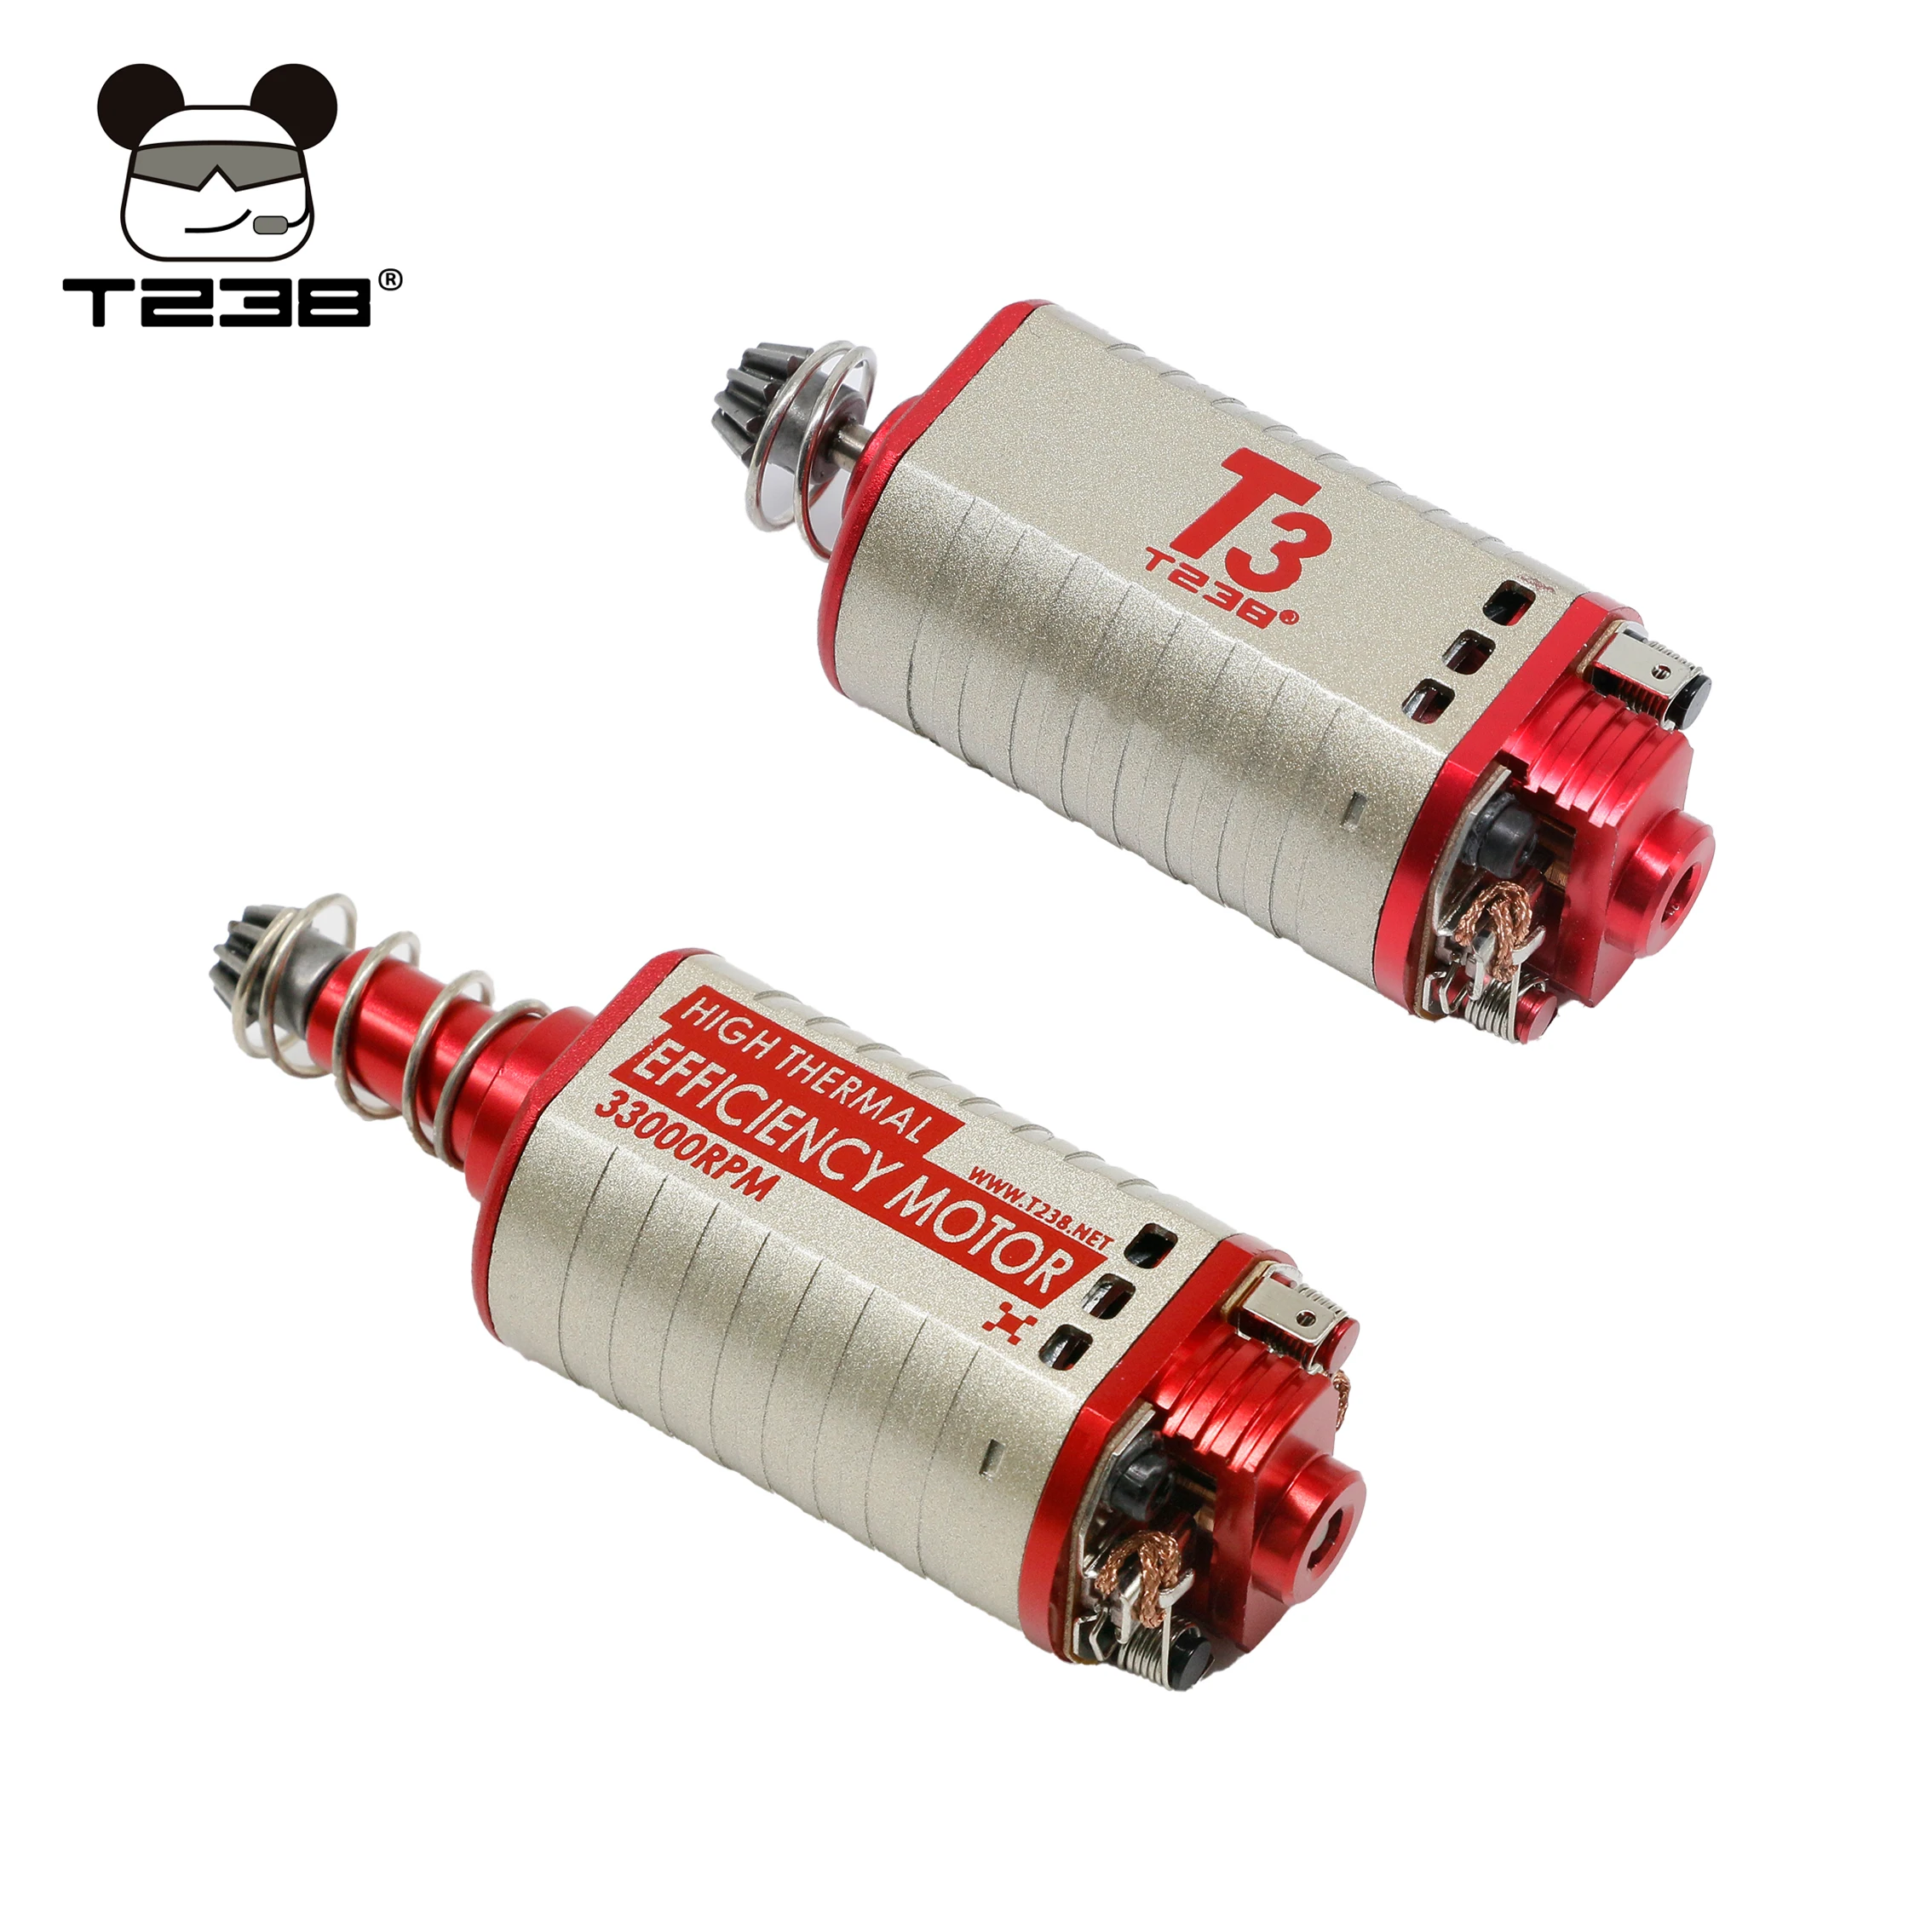 T238 High Thermal Efficiency Motor High-speed High-torque Ultra-low Power Consumption Long/Short Axis 480 Motor for Airsoft AEG